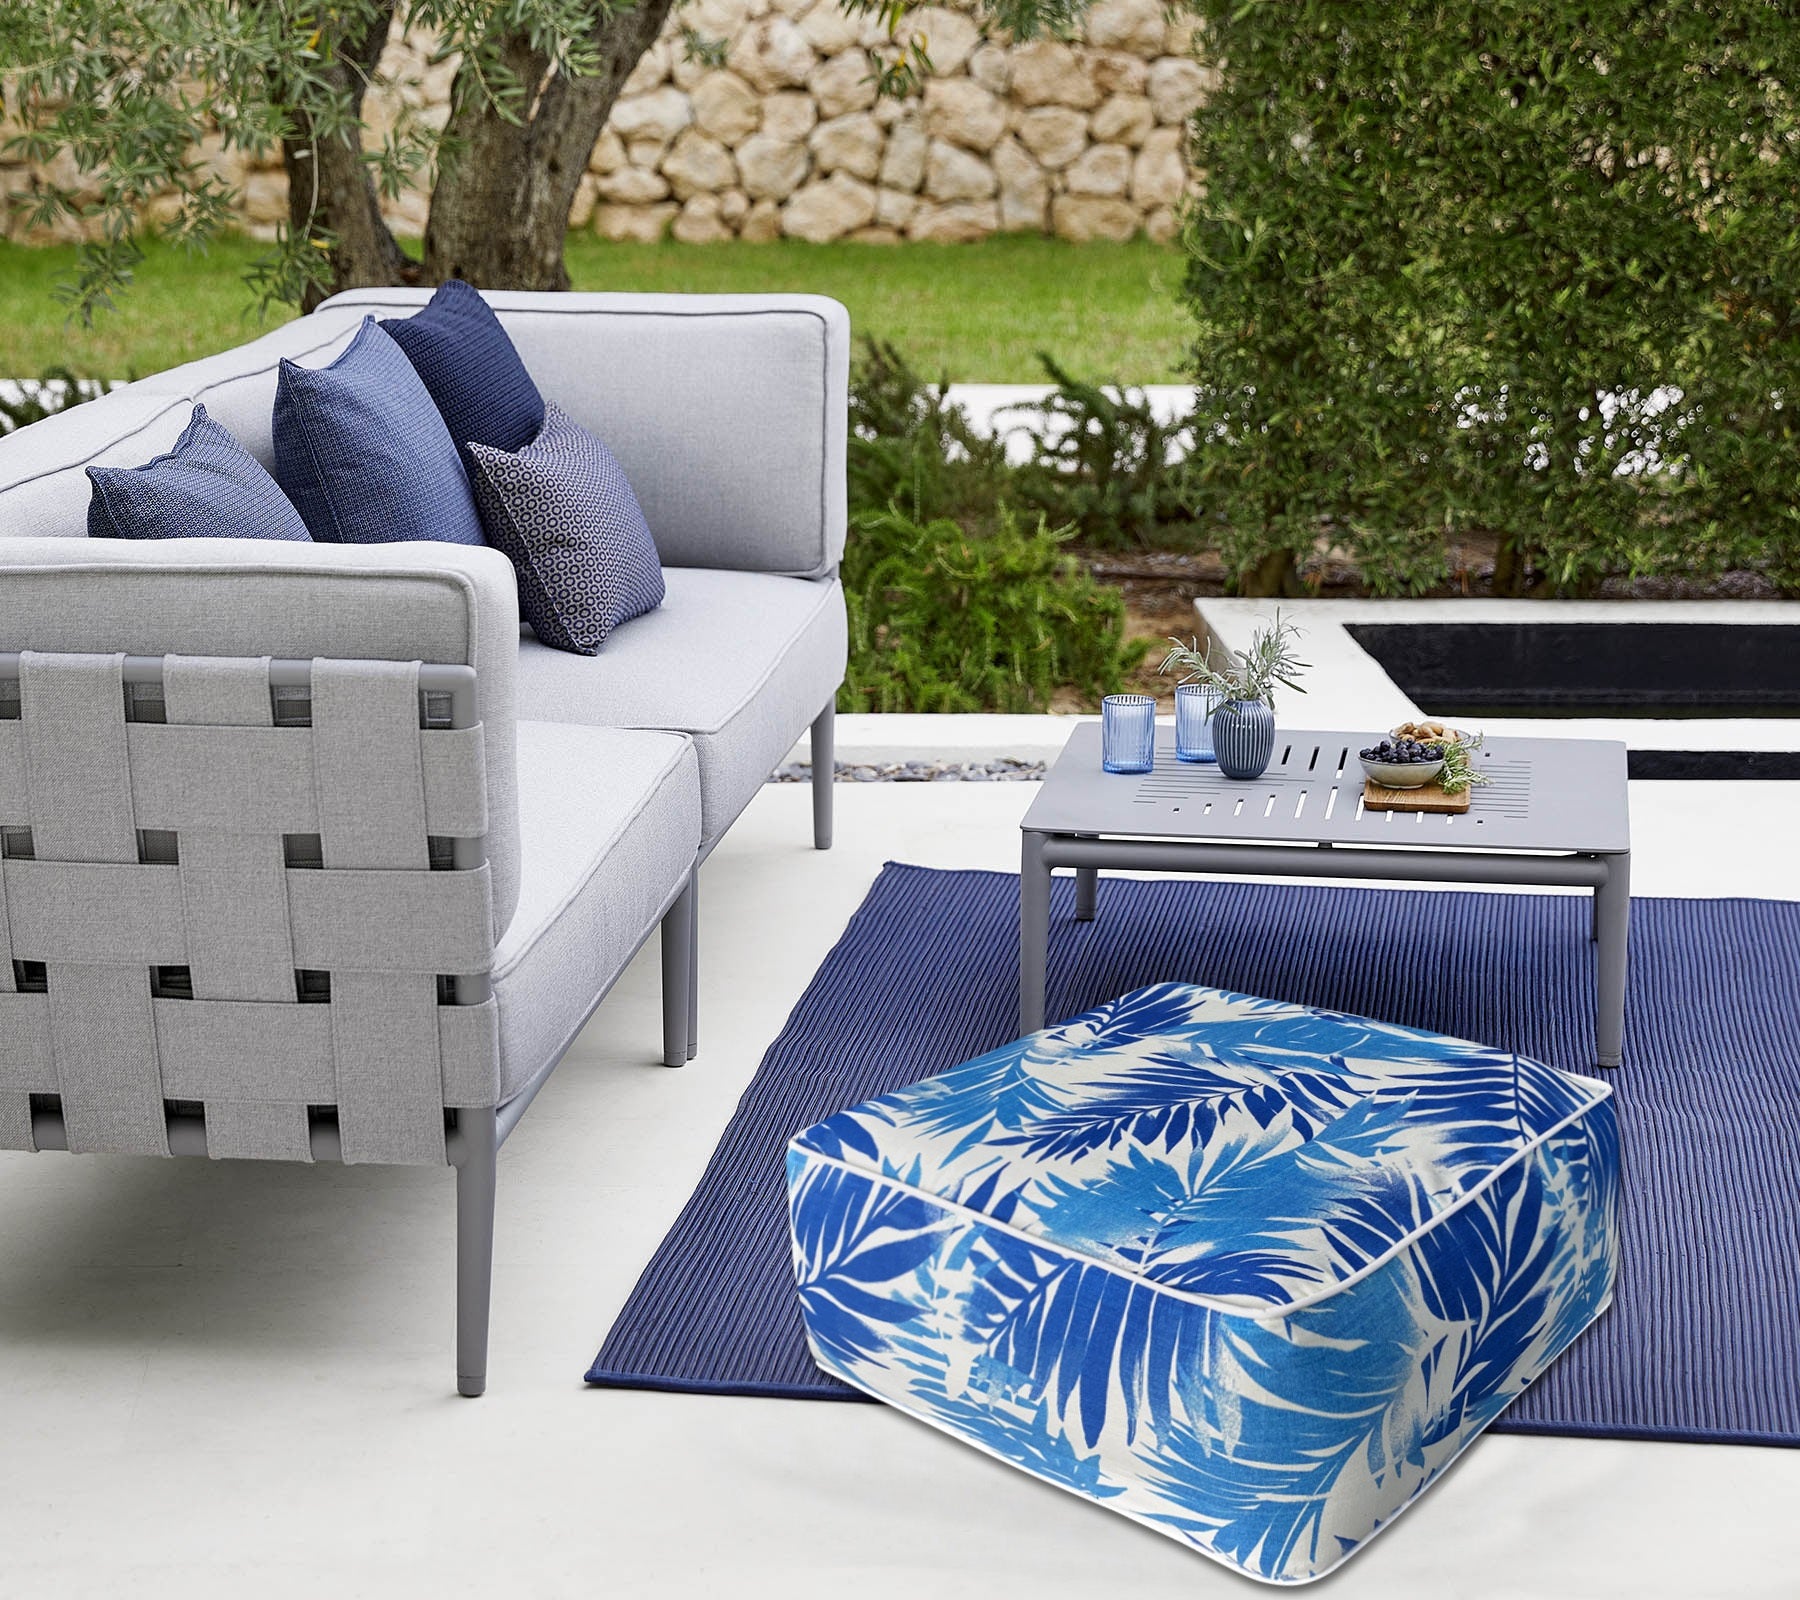 Outdoor Inflatable Ottoman Blue Leaf Square 23x23x9 Inch Patio Foot Stools and Ottomans